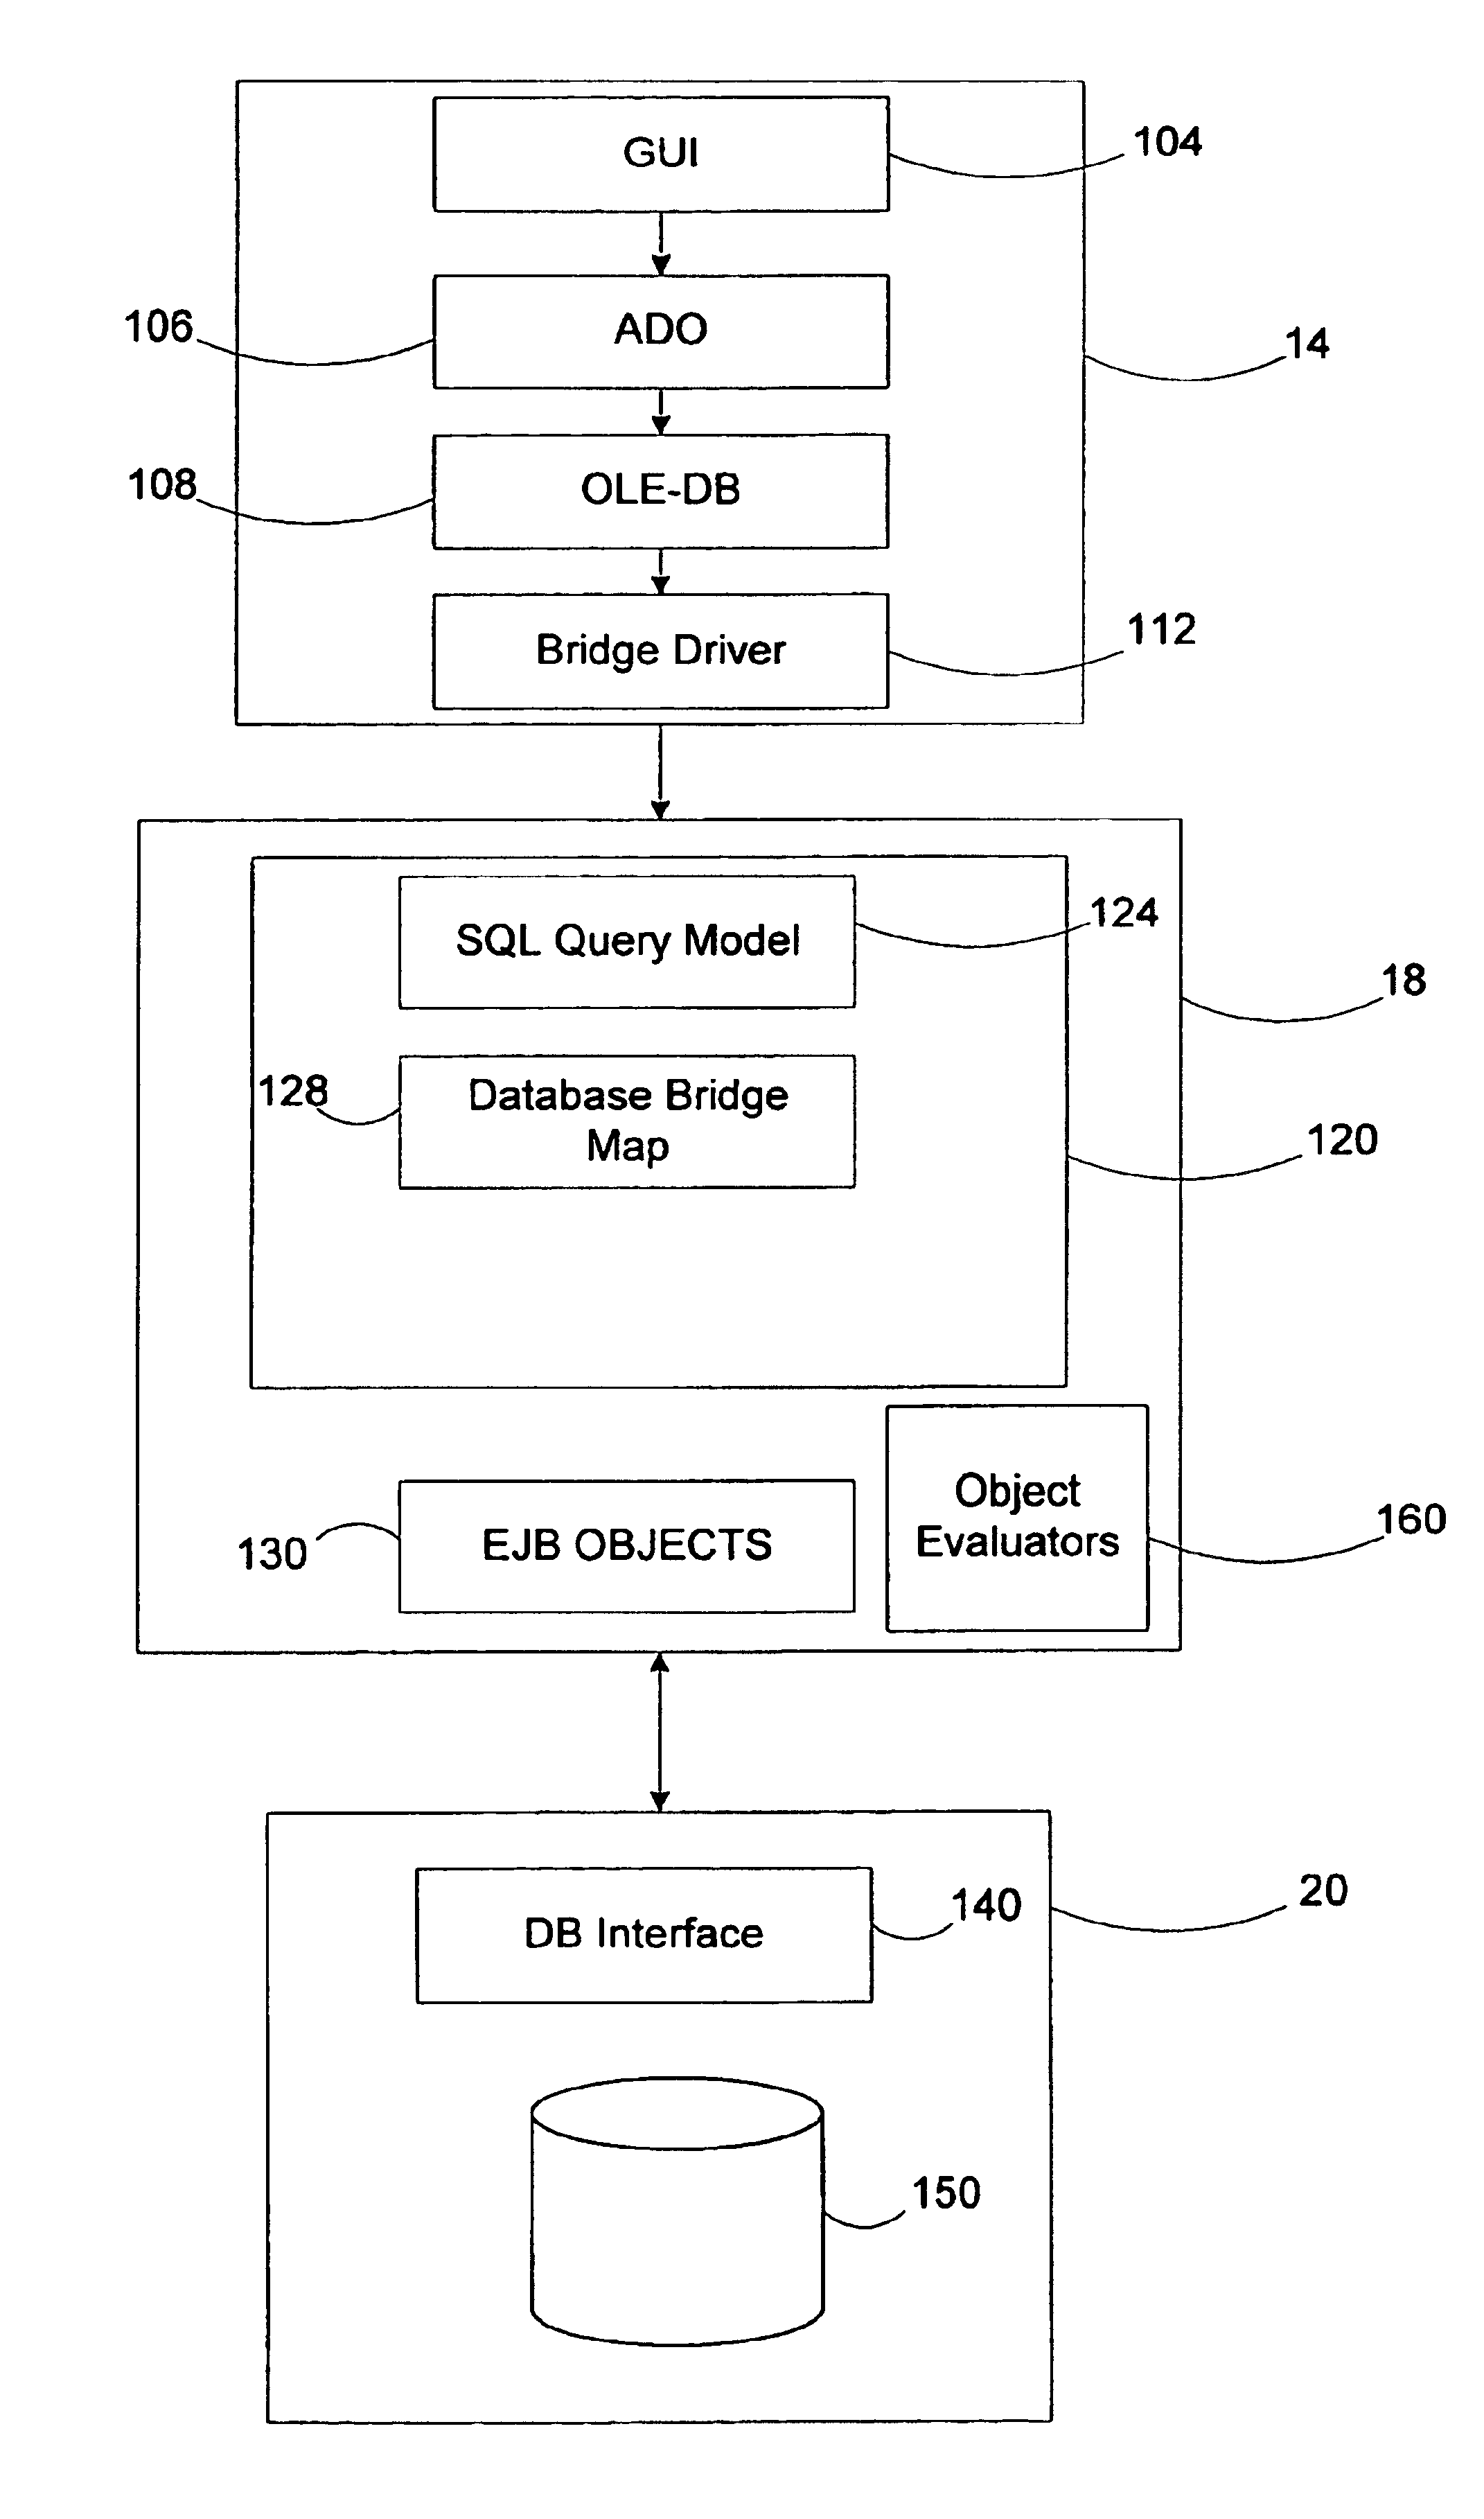 Database access bridge system and process